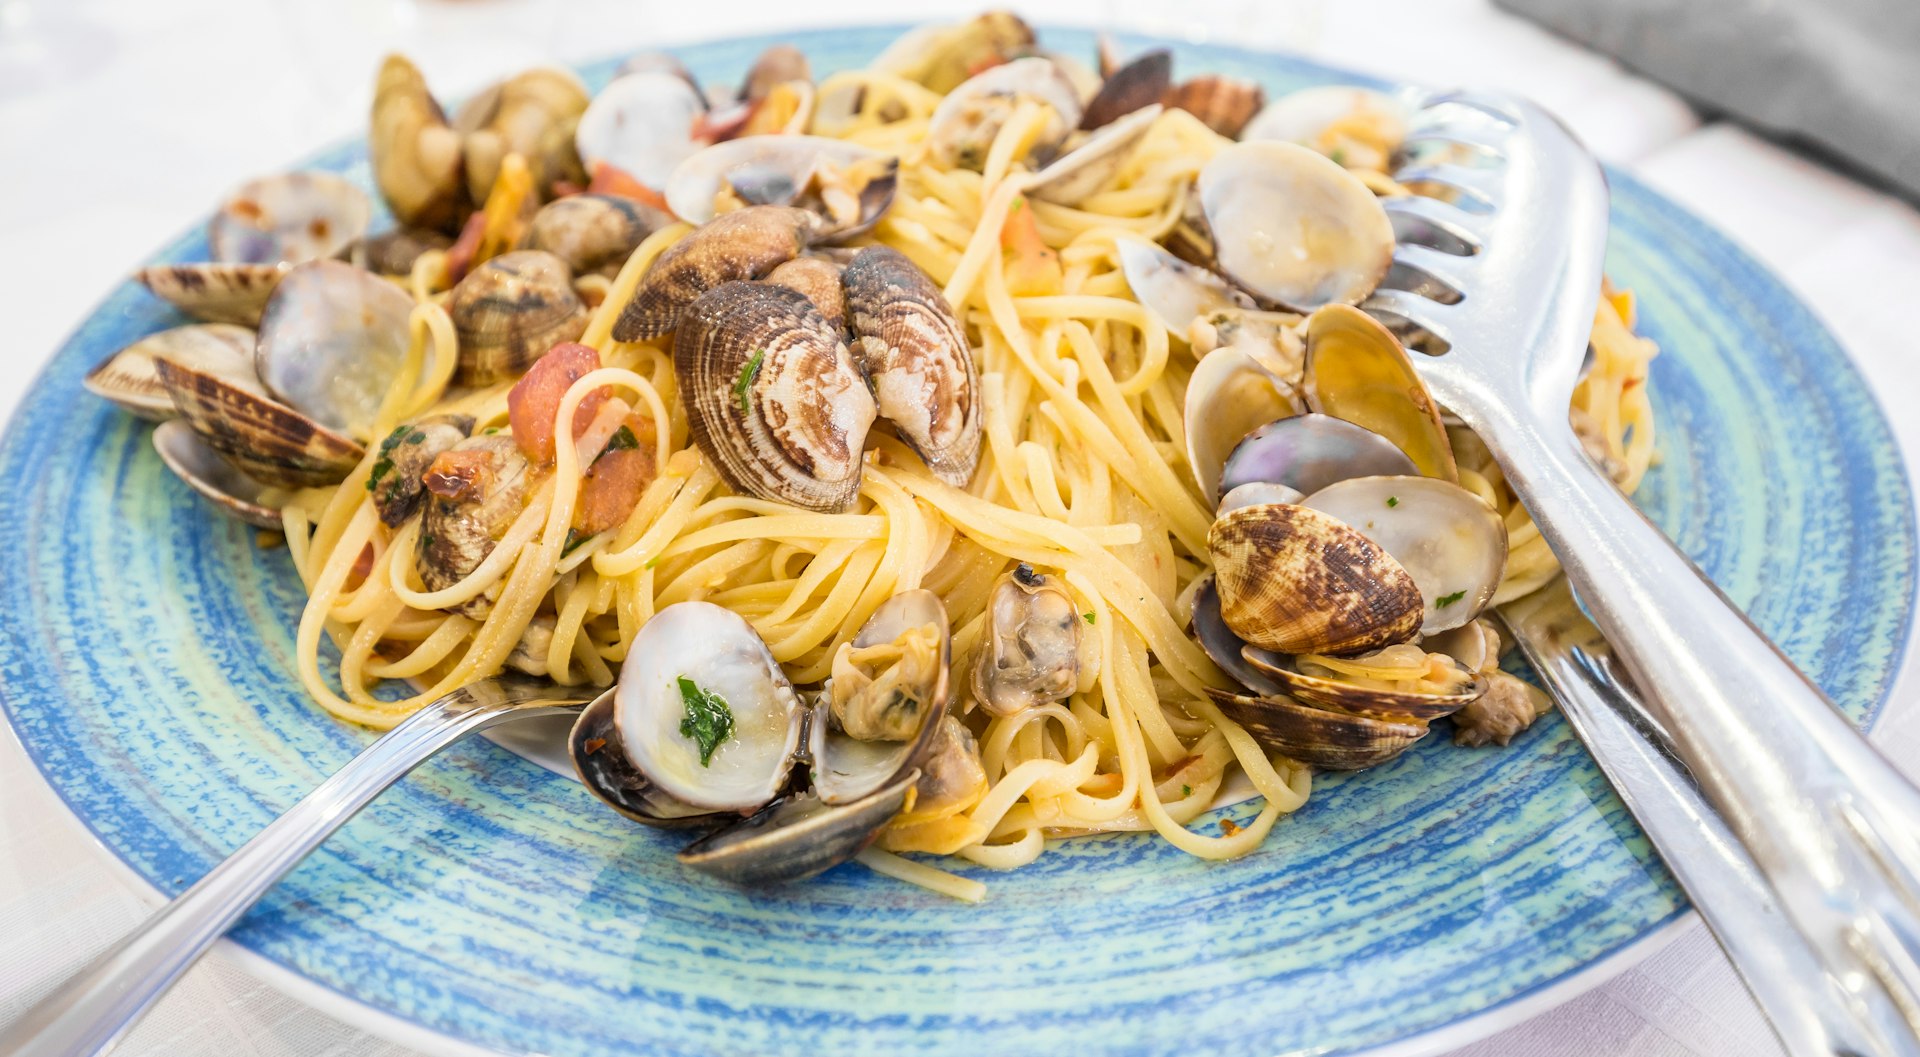 A dish of spaghetti with clams on a white table cloth